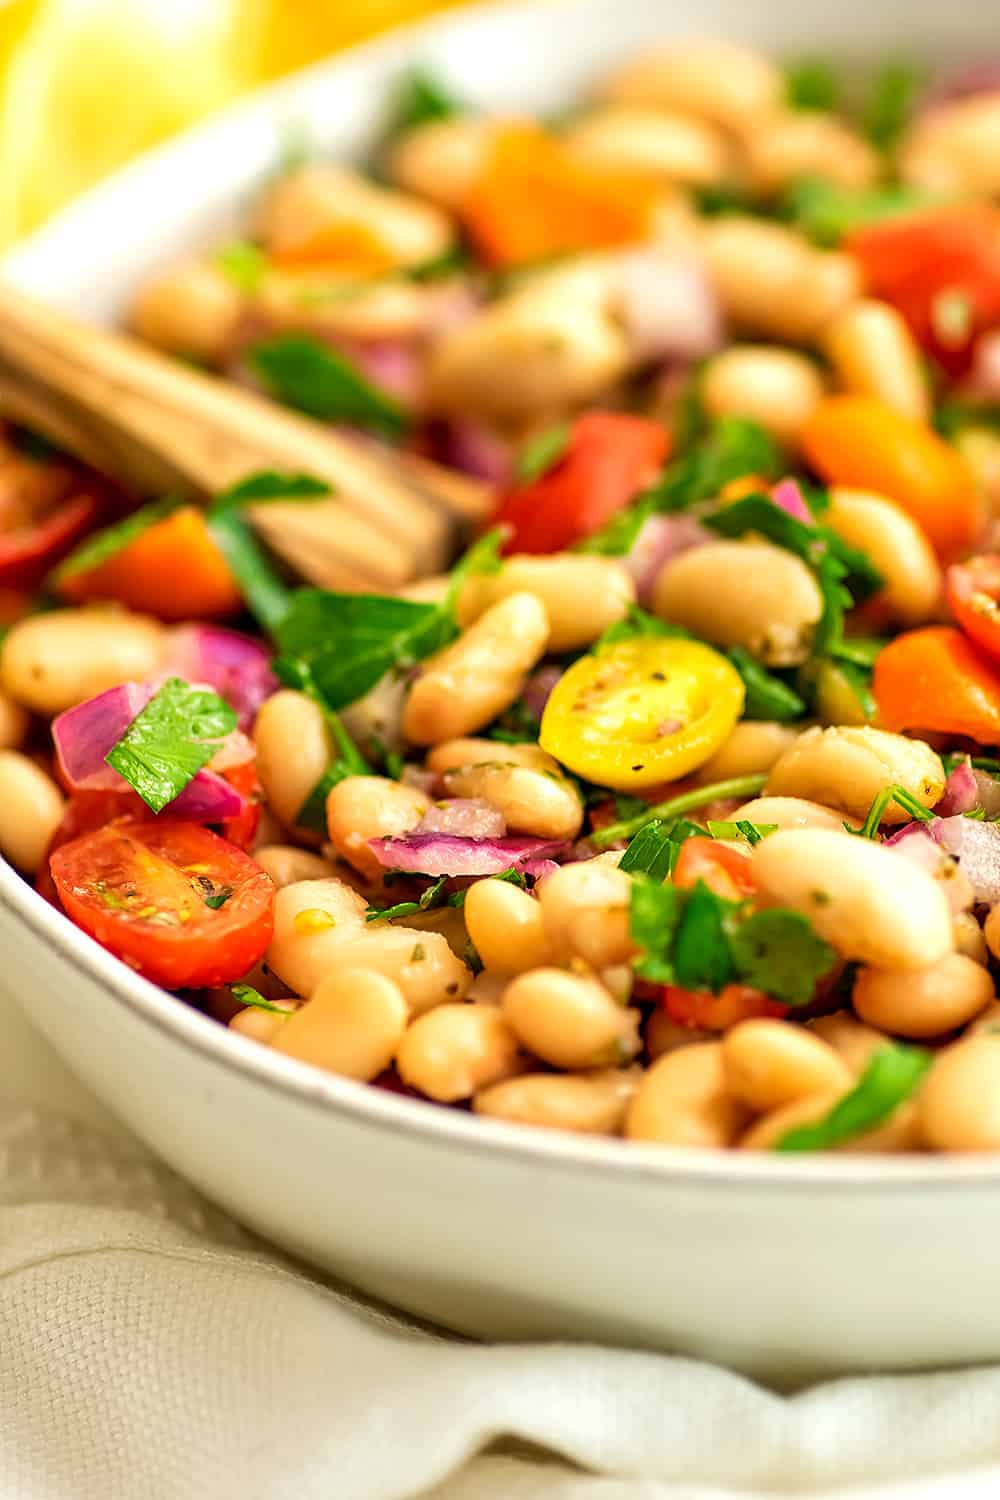 Greek White Bean Salad - Ready in 5 Minutes, One Bowl | Bites of Wellness